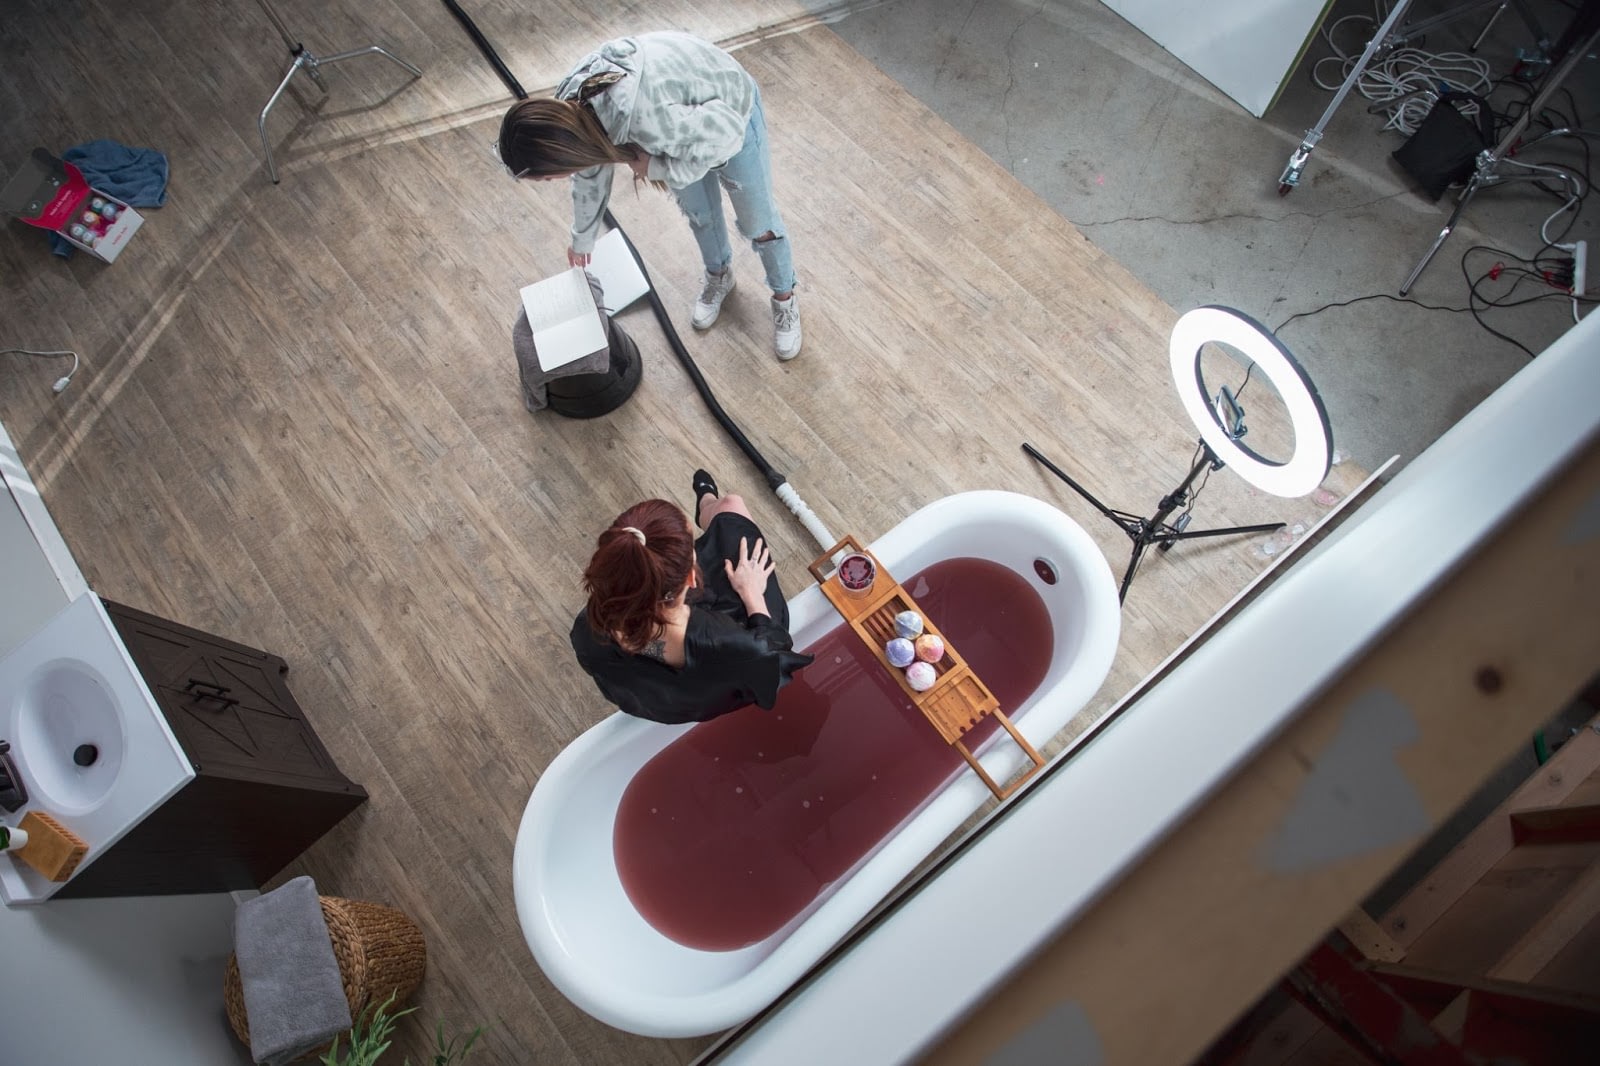 camera crew setting up around a bath filled with red fluid